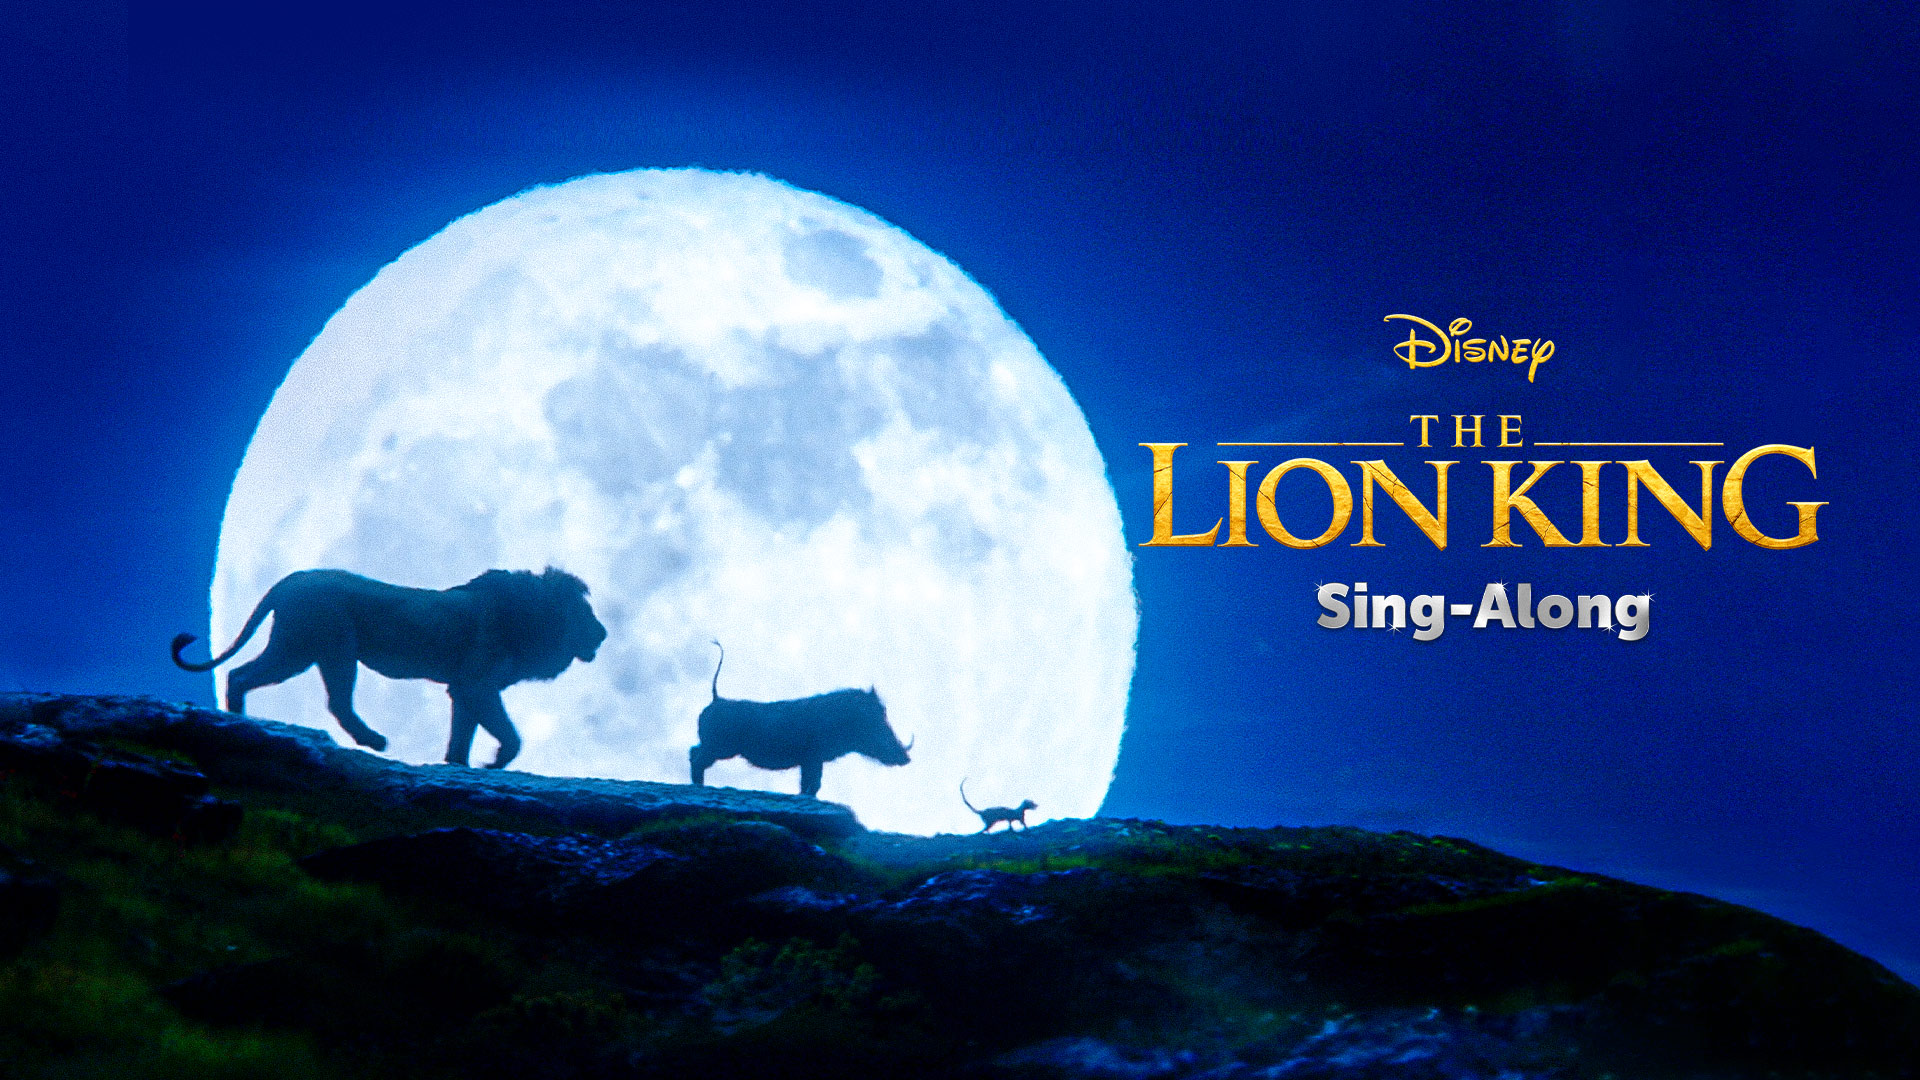 The Lion King (2019) Sing-Along